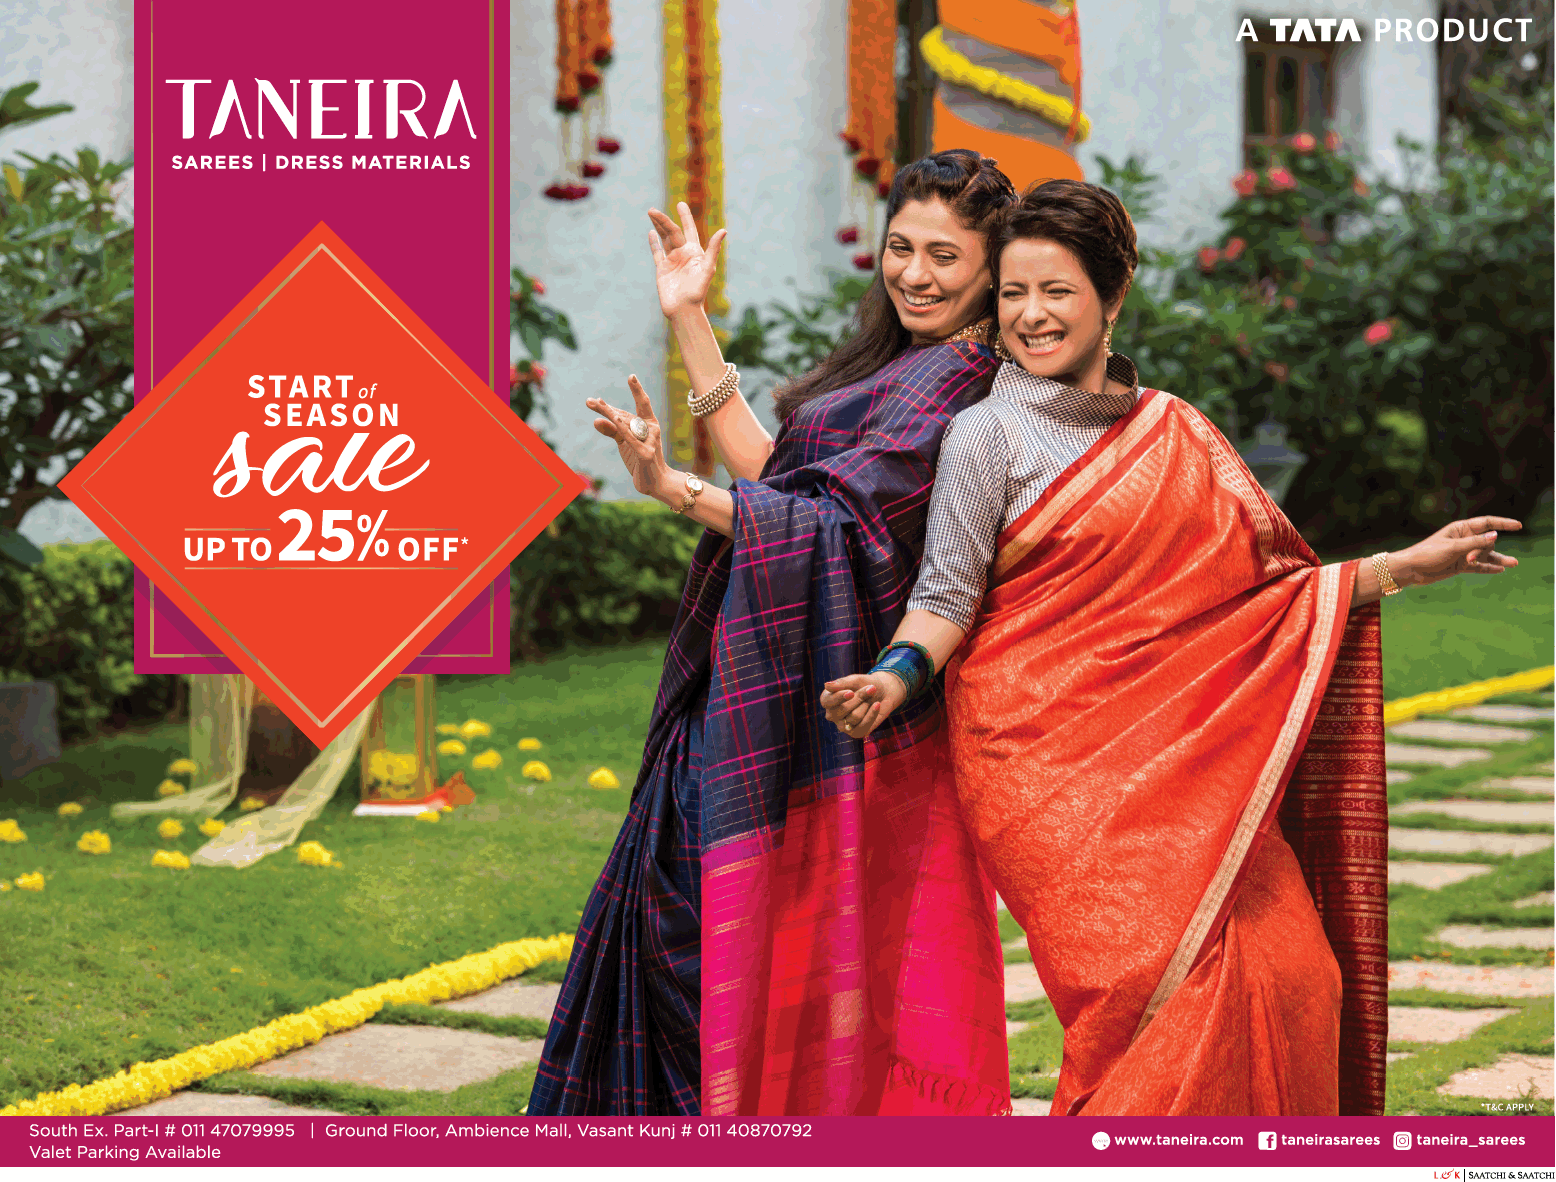 taneira-start-of-season-sale-up-to-25%-off-ad-delhi-times-26-07-2019.png